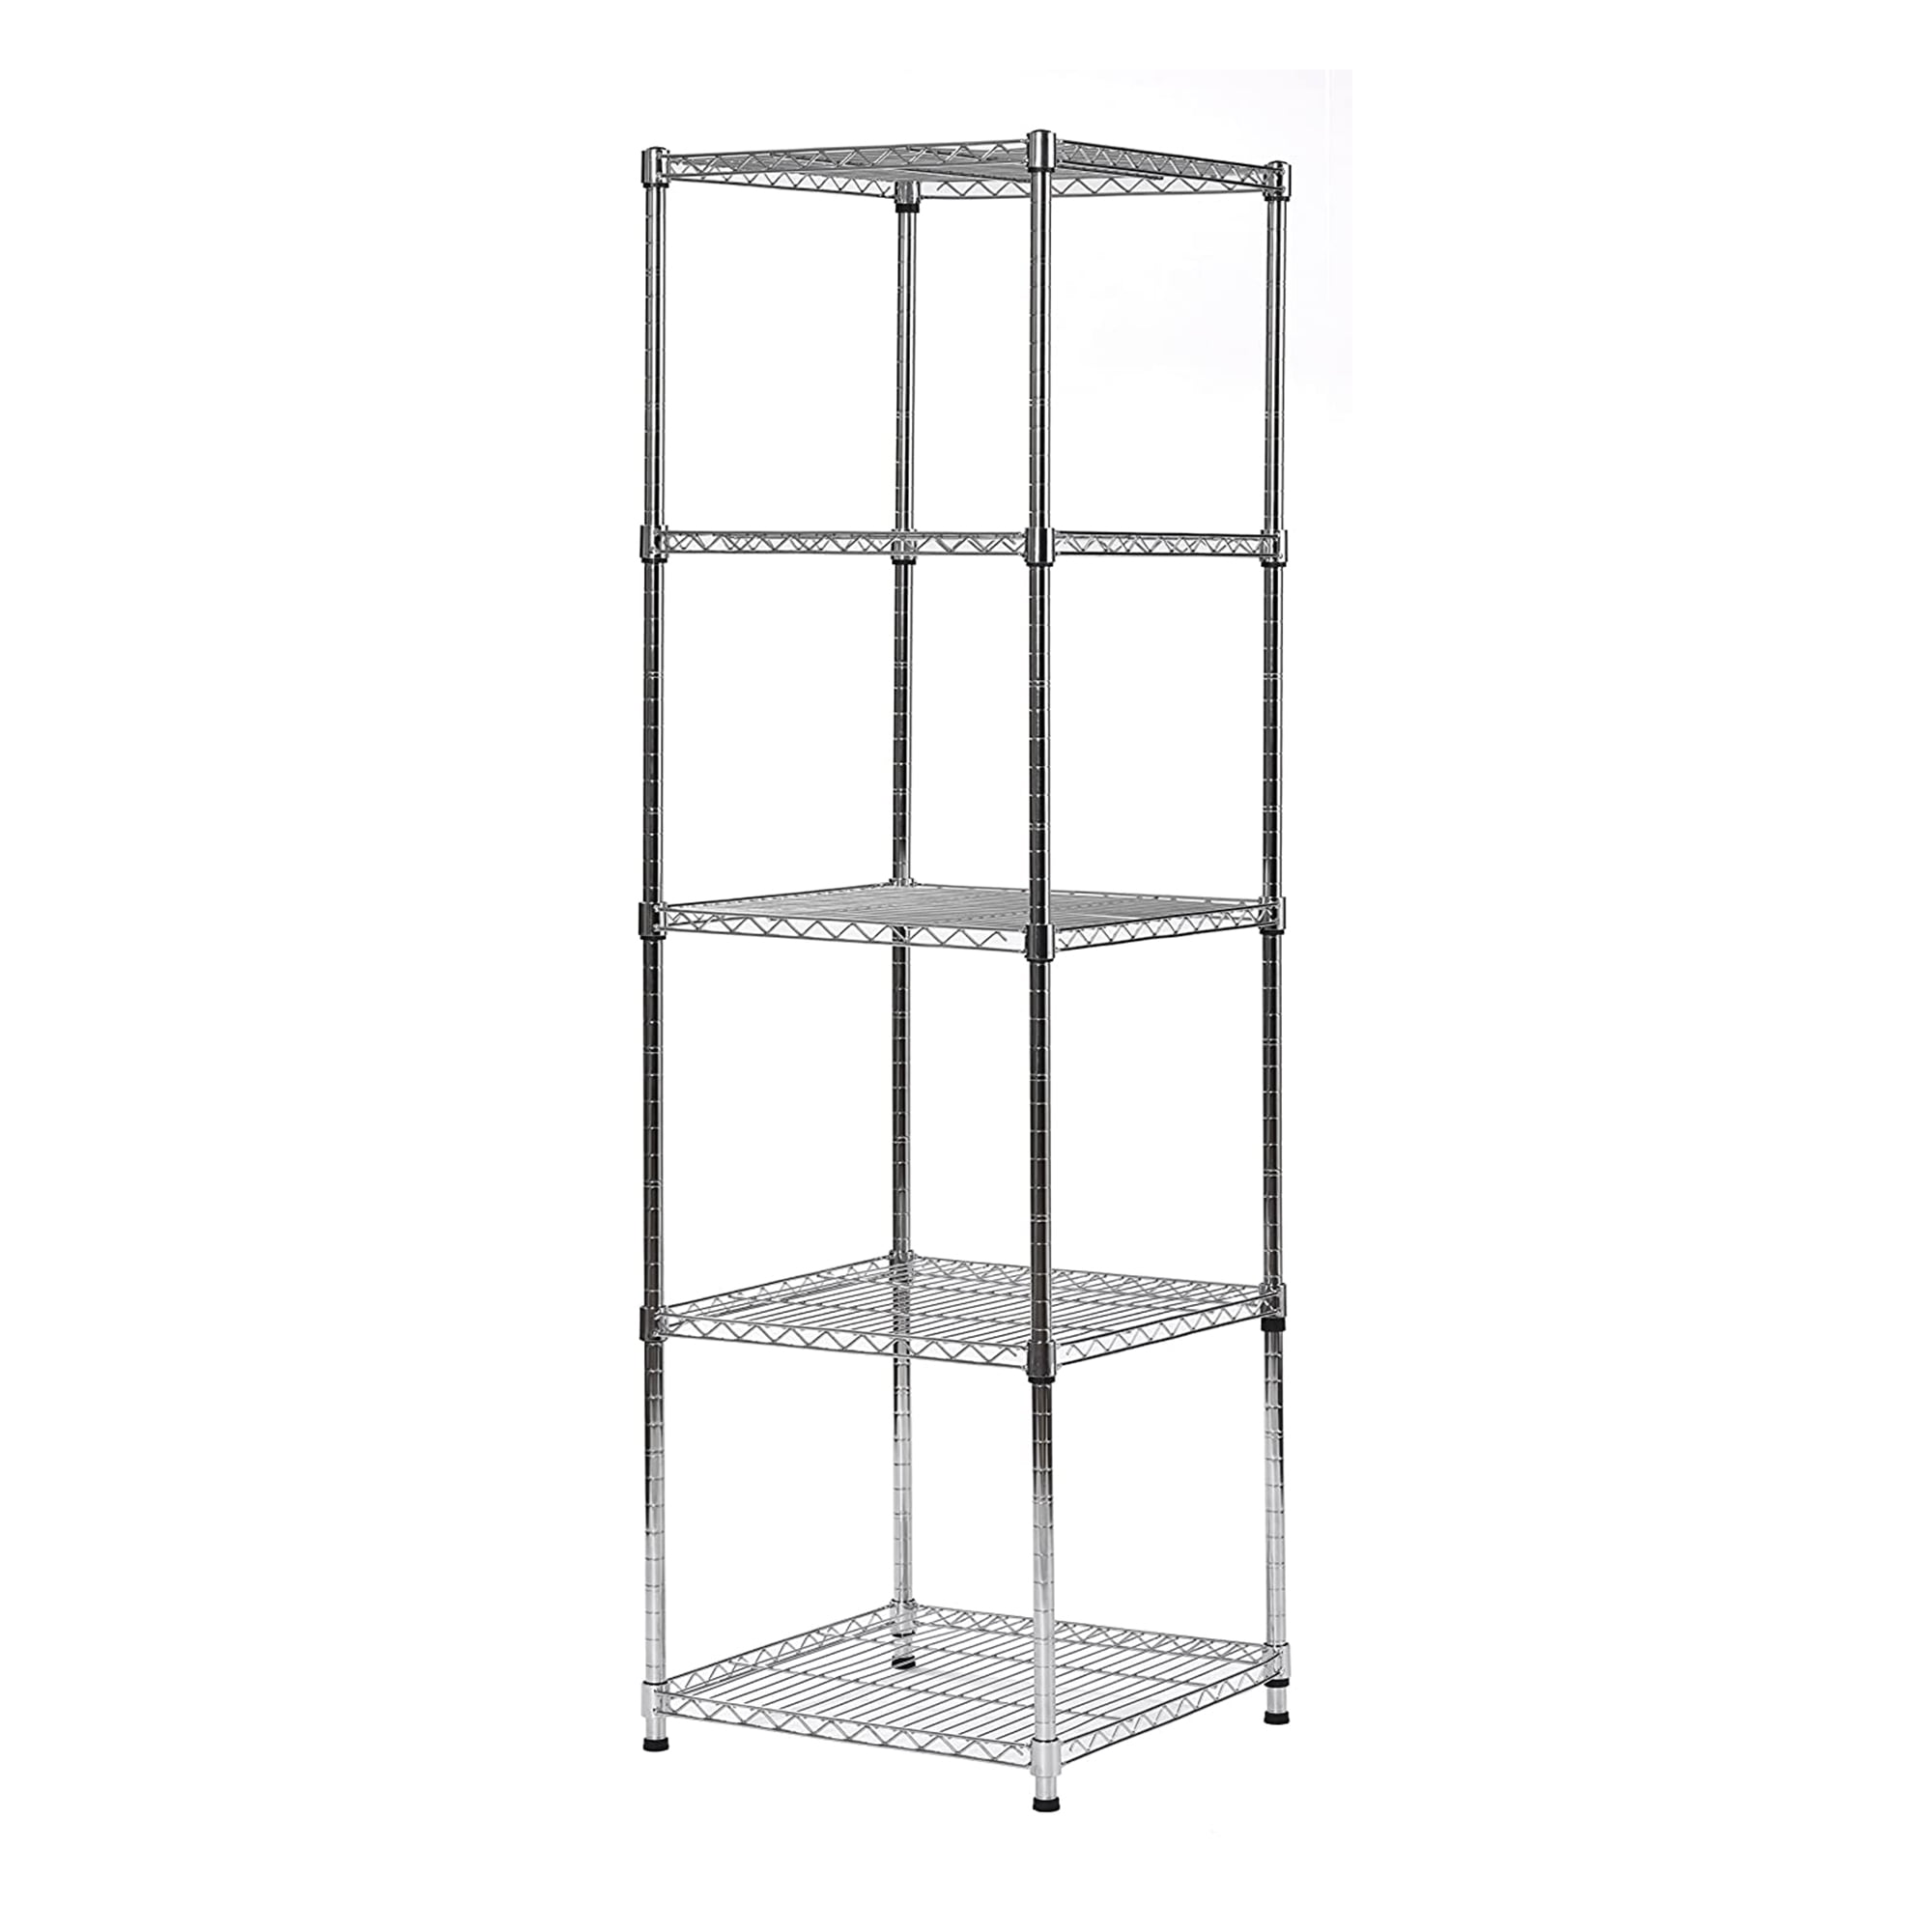 Perfect for Home Posts x 48 inch Garage Metal Bookshelv. Commercial Hospital 21 inch Childrens Shelters Nursing and Care Homes NSF Chrome 5-Shelf Kit with 54 inch 